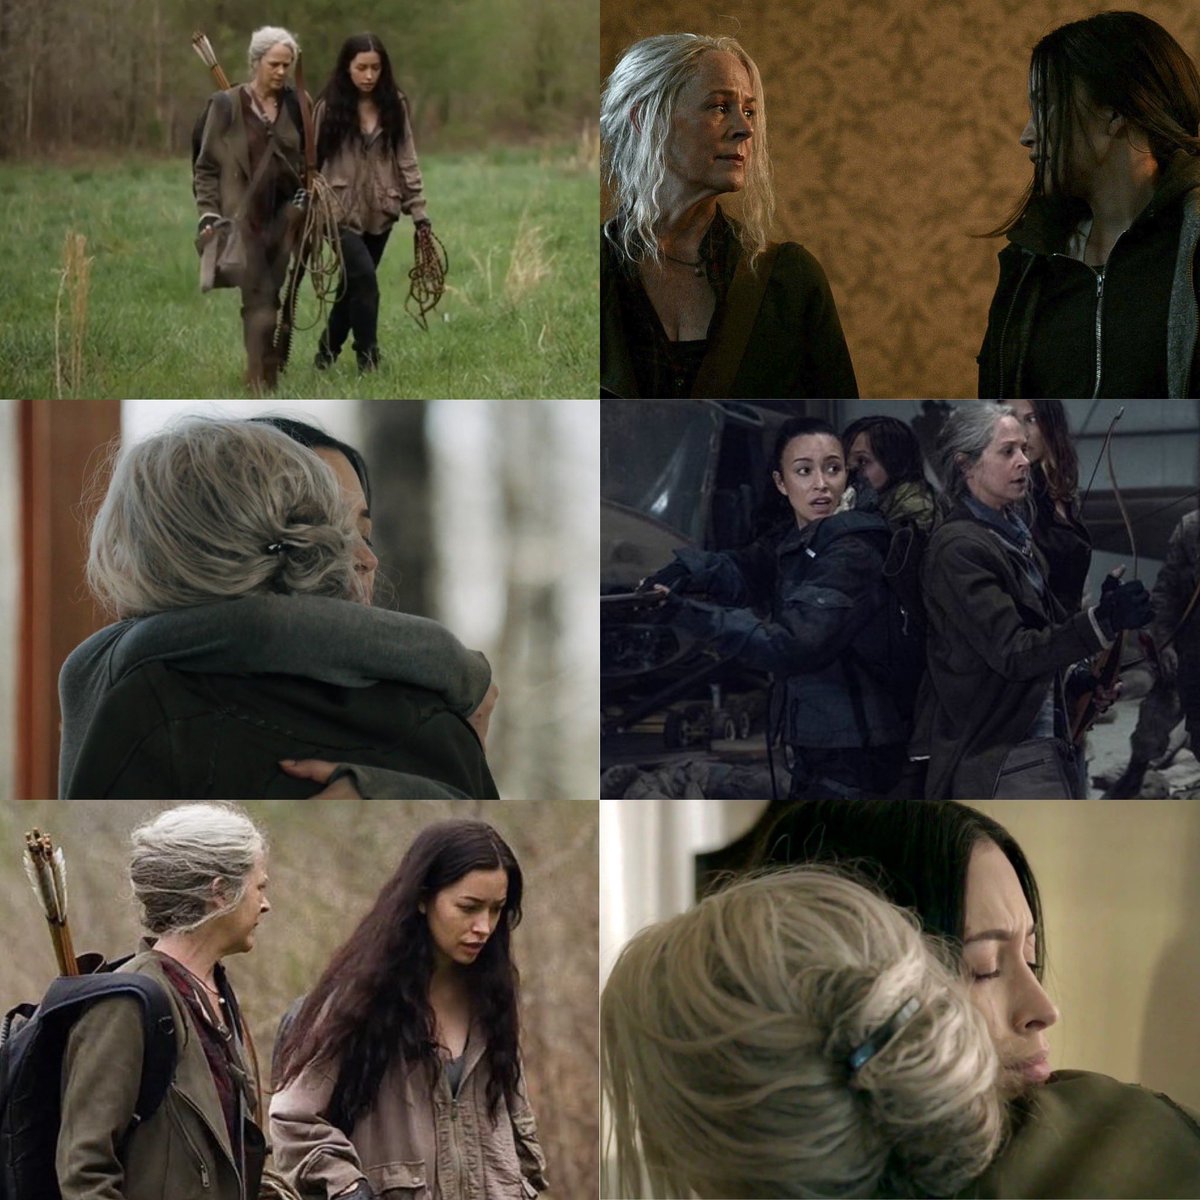 rosita and carol’s little moments together in s11 mean everything to me :’) #TWD